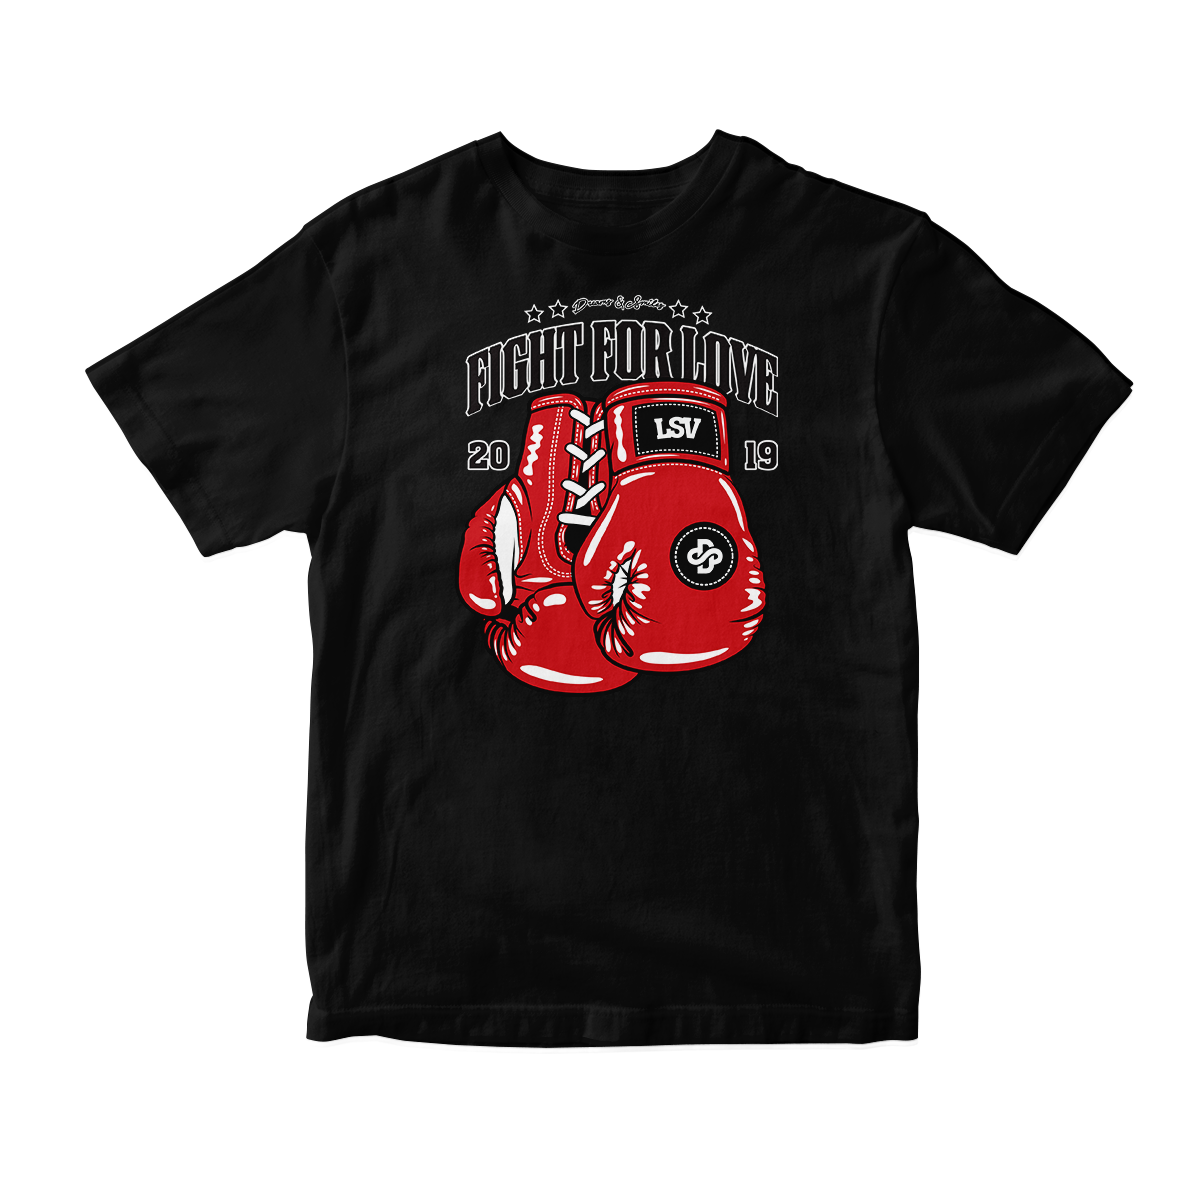 'Fight For Love' in Bred 11 CW Short Sleeve Tee